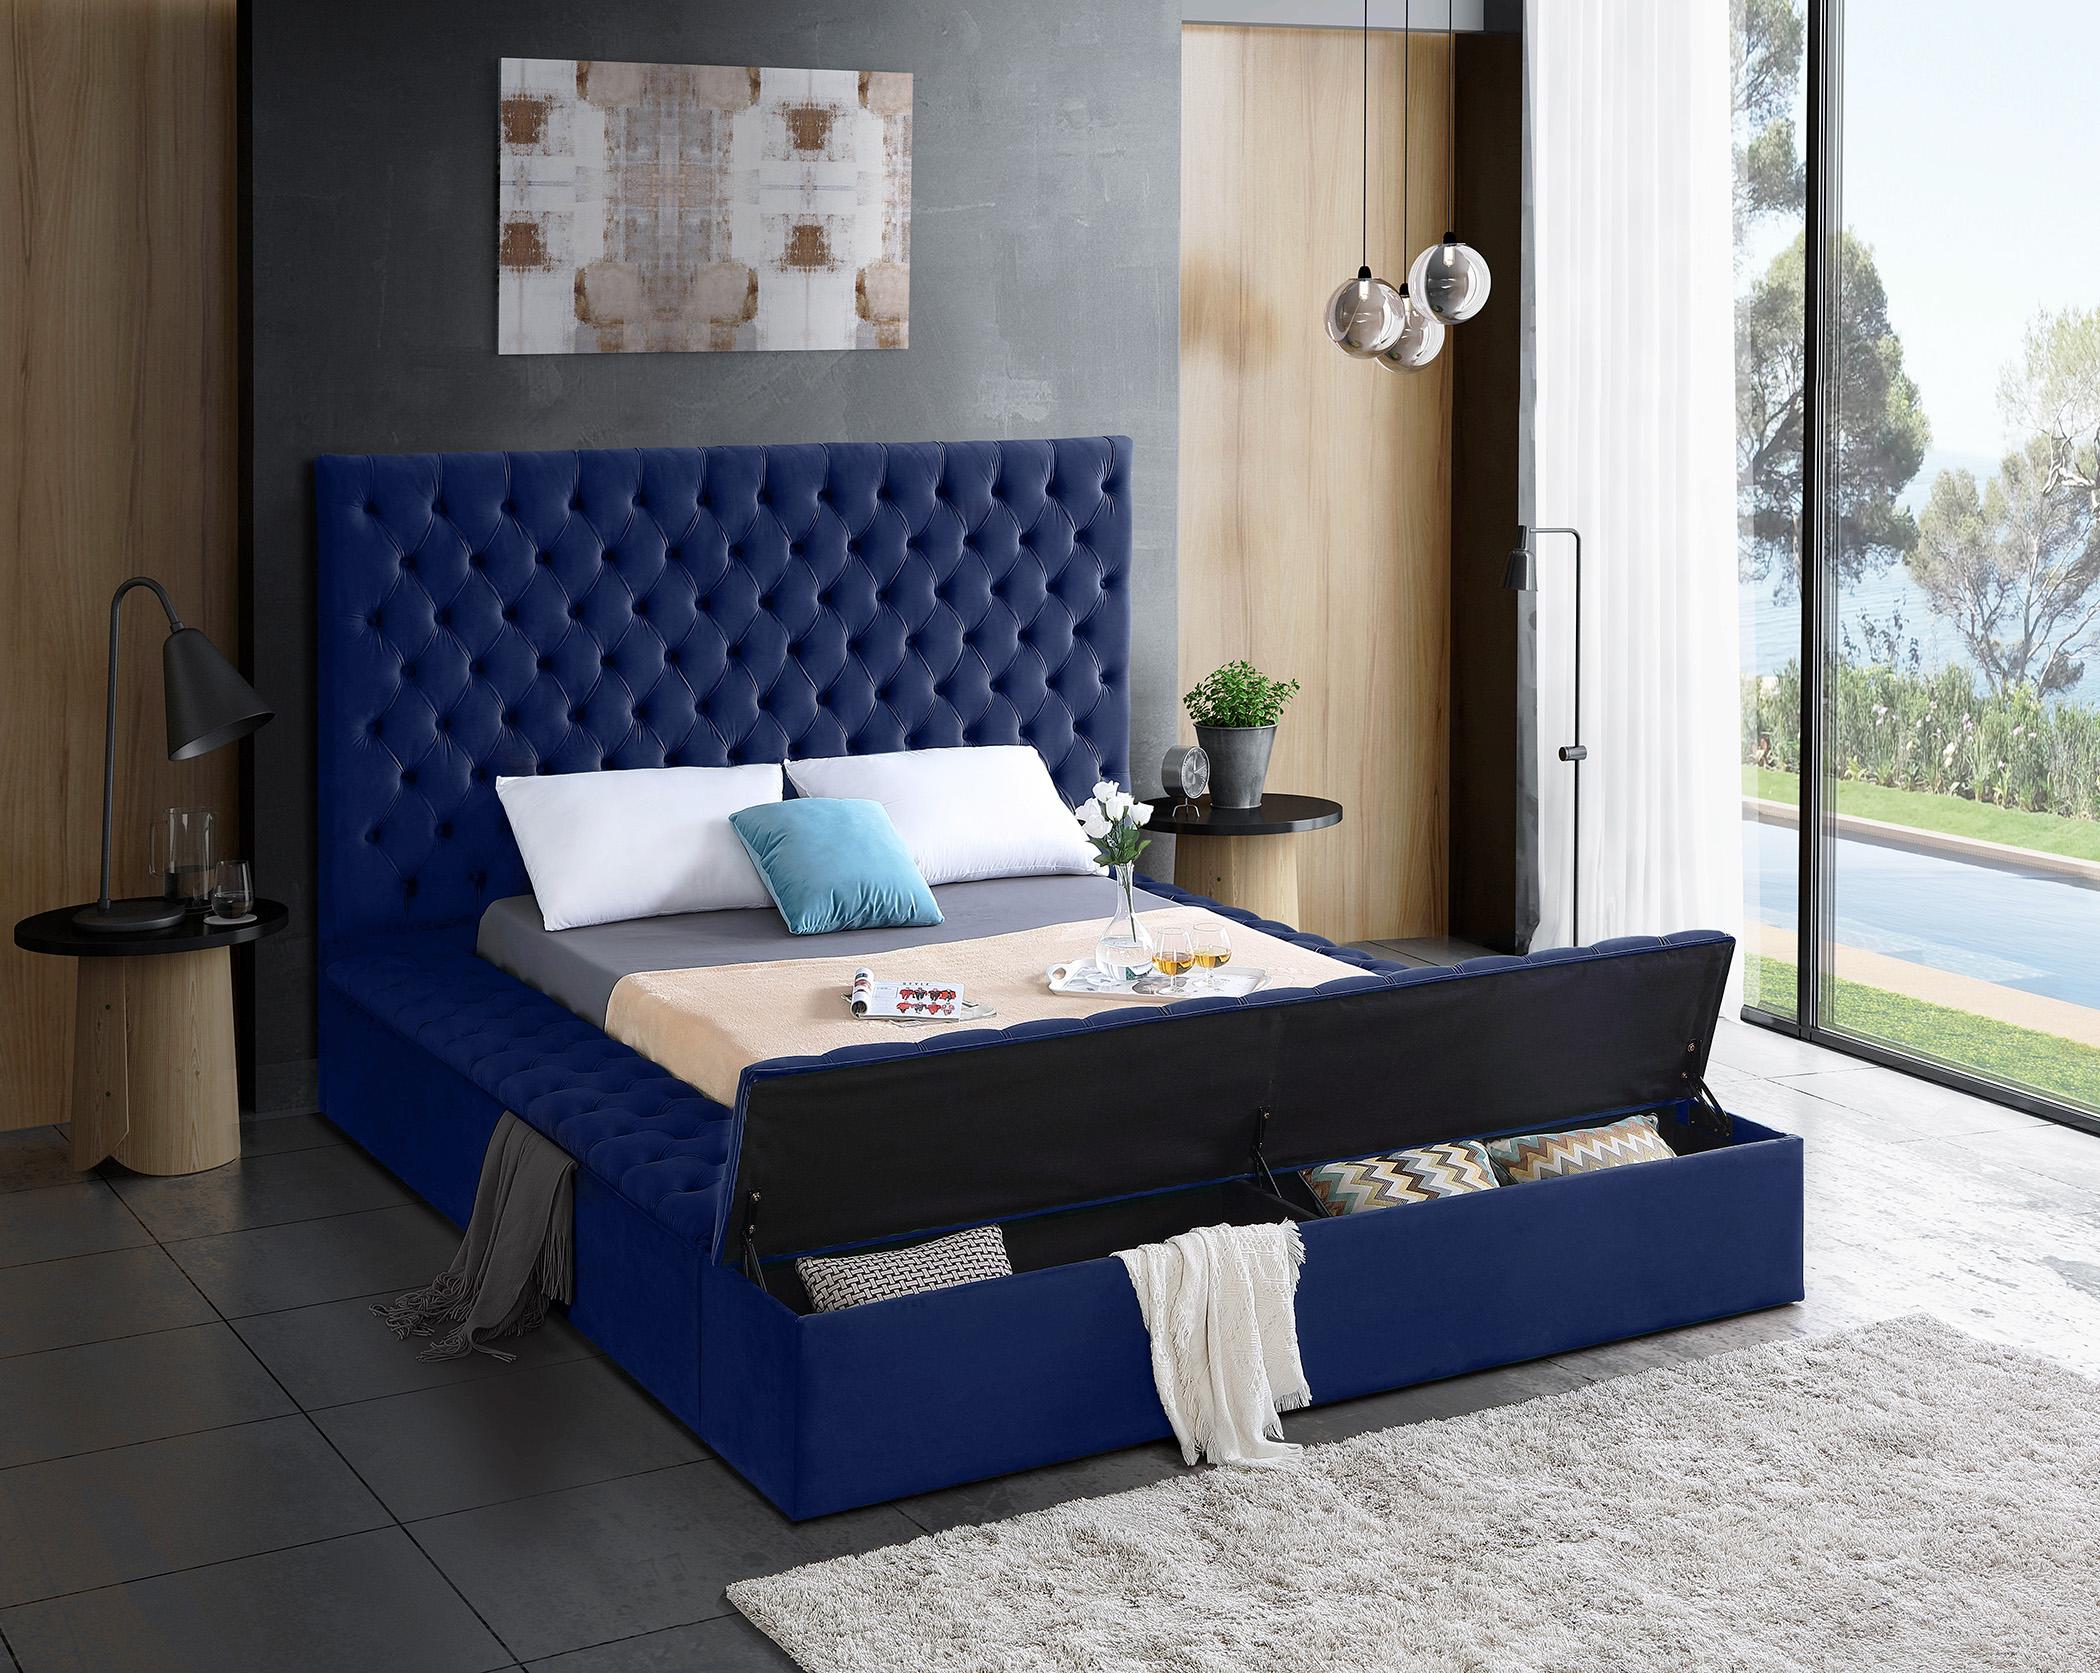 

    
Meridian Furniture BLISS Navy-F Storage Bed Navy blue BlissNavy-F
